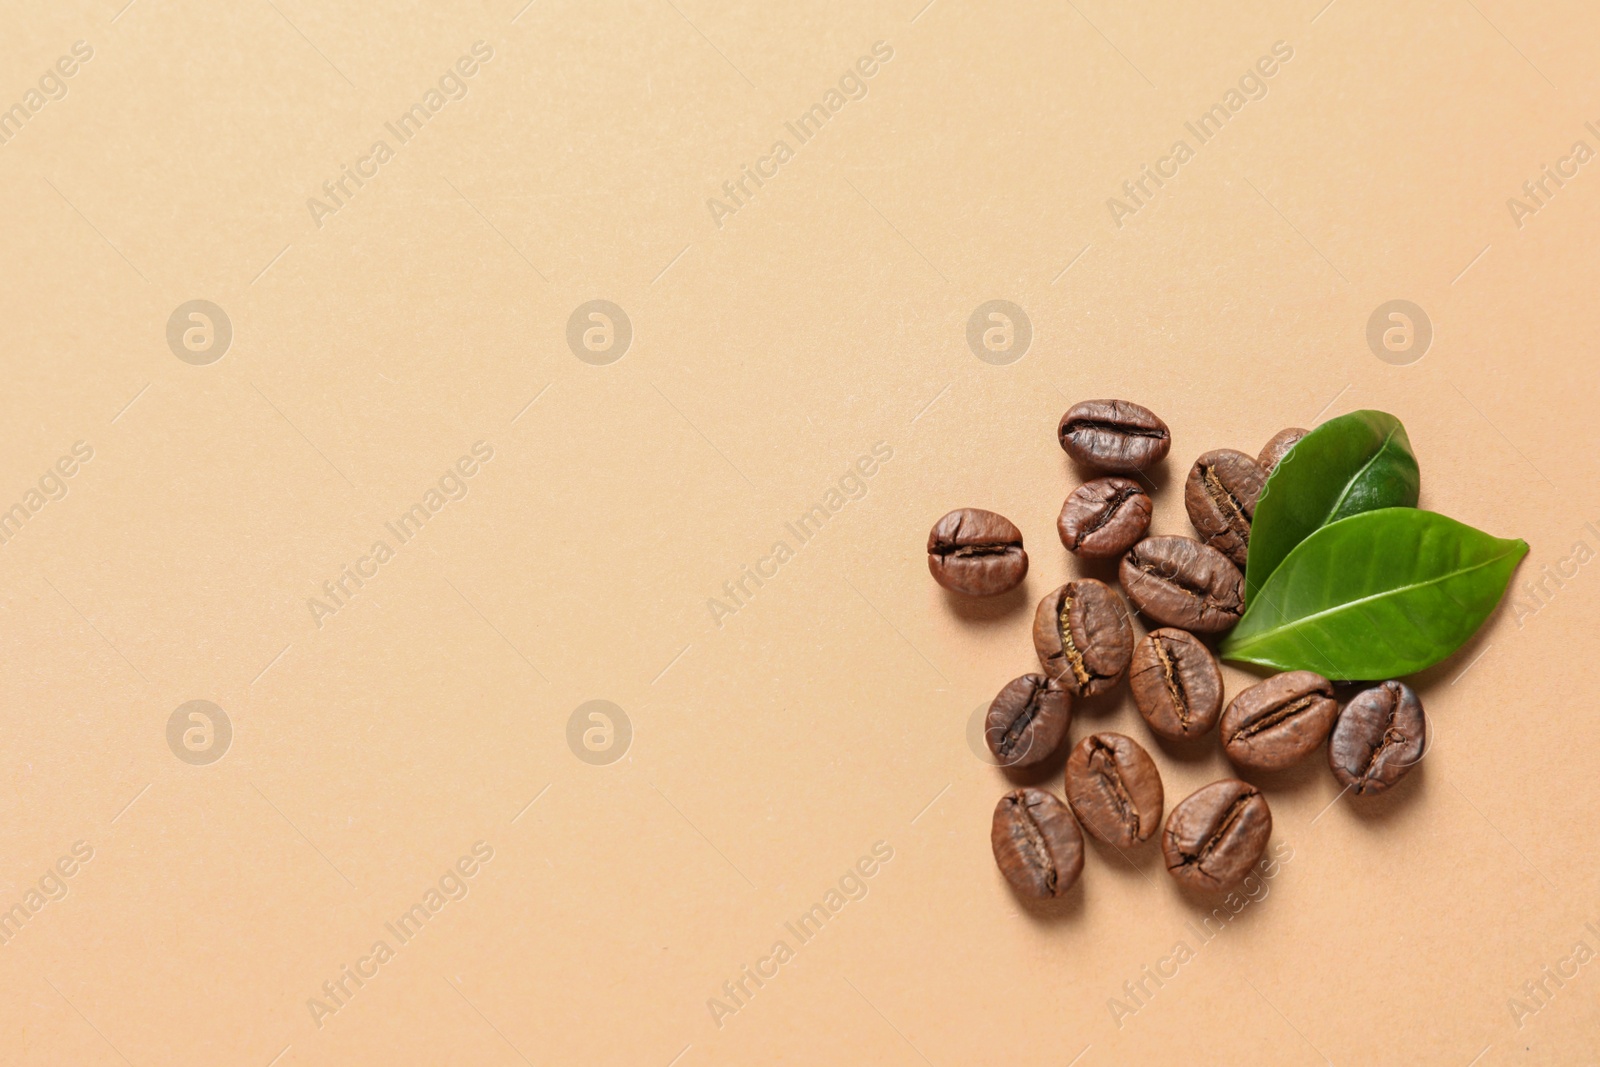 Photo of Fresh green coffee leaves and beans on light orange background, flat lay. Space for text